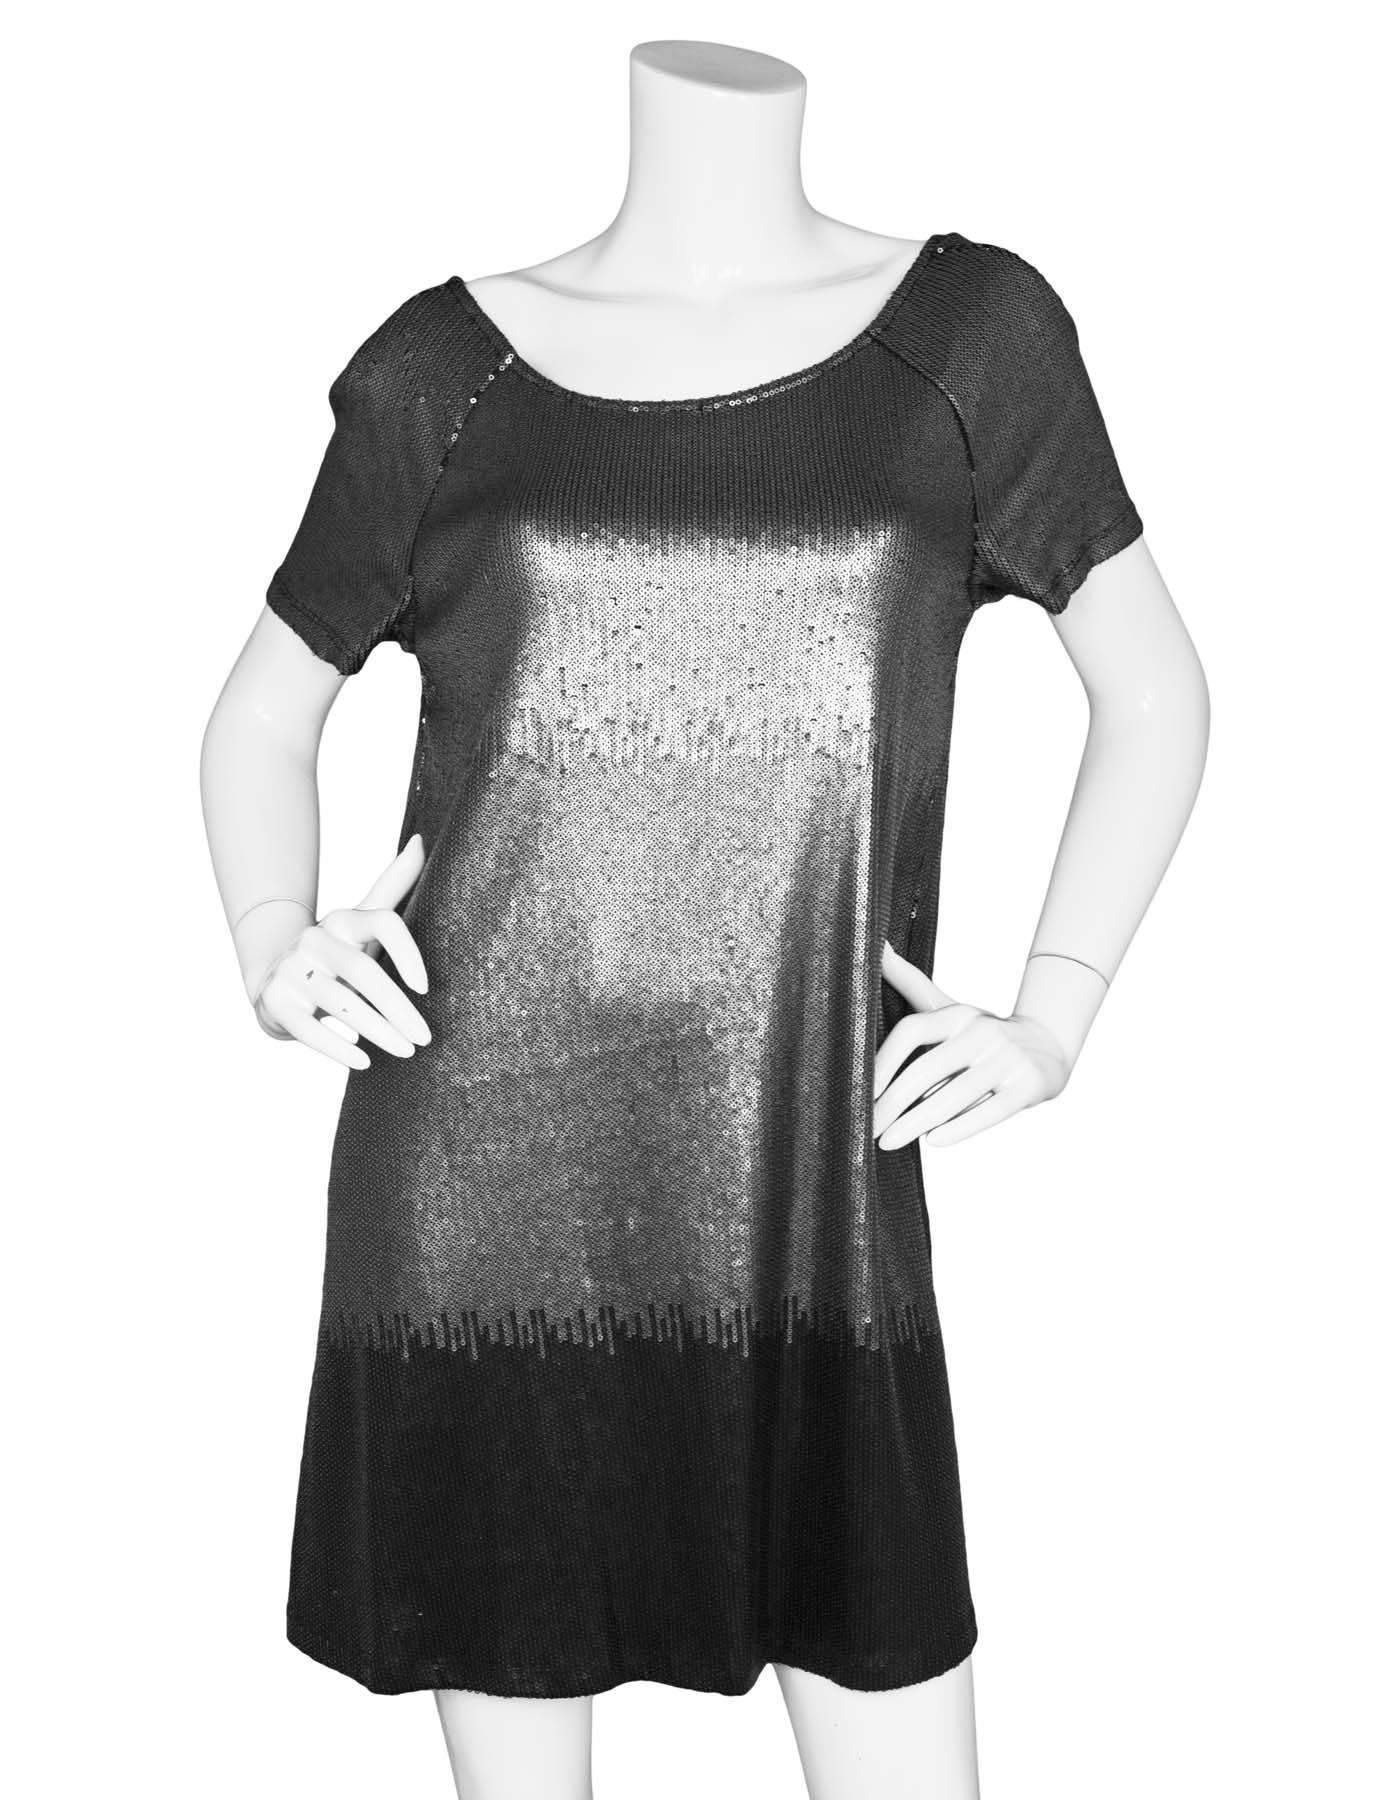 Free People Black & Grey Sequin Ombre Dress Sz S

Features low back

Made In: China
Color: Black, grey
Composition: 62% polyester, 35% rayon, 3% spandex
Lining: Black textile
Closure/Opening: Pullover
Exterior Pockets: None
Interior Pockets: